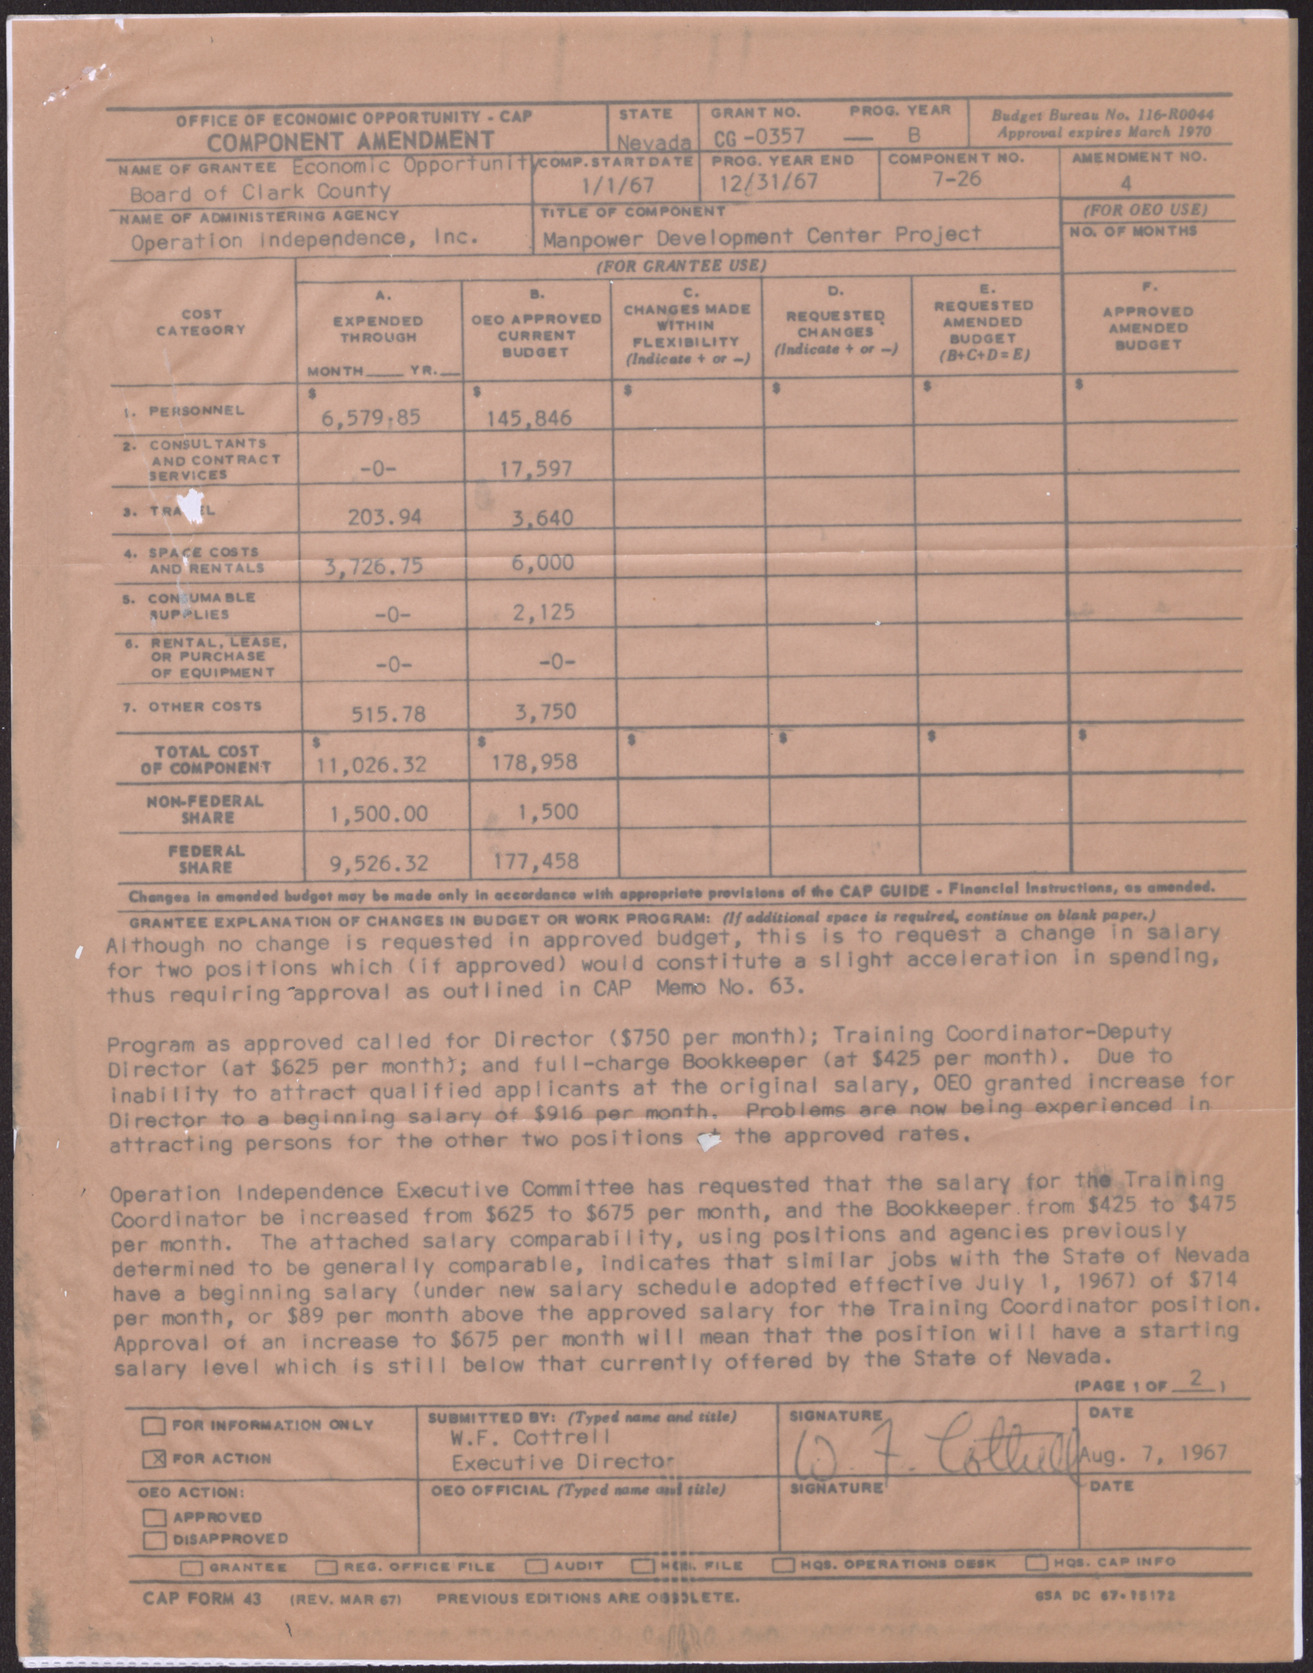 Approval of CAP form (3 pages), August 7, 1967